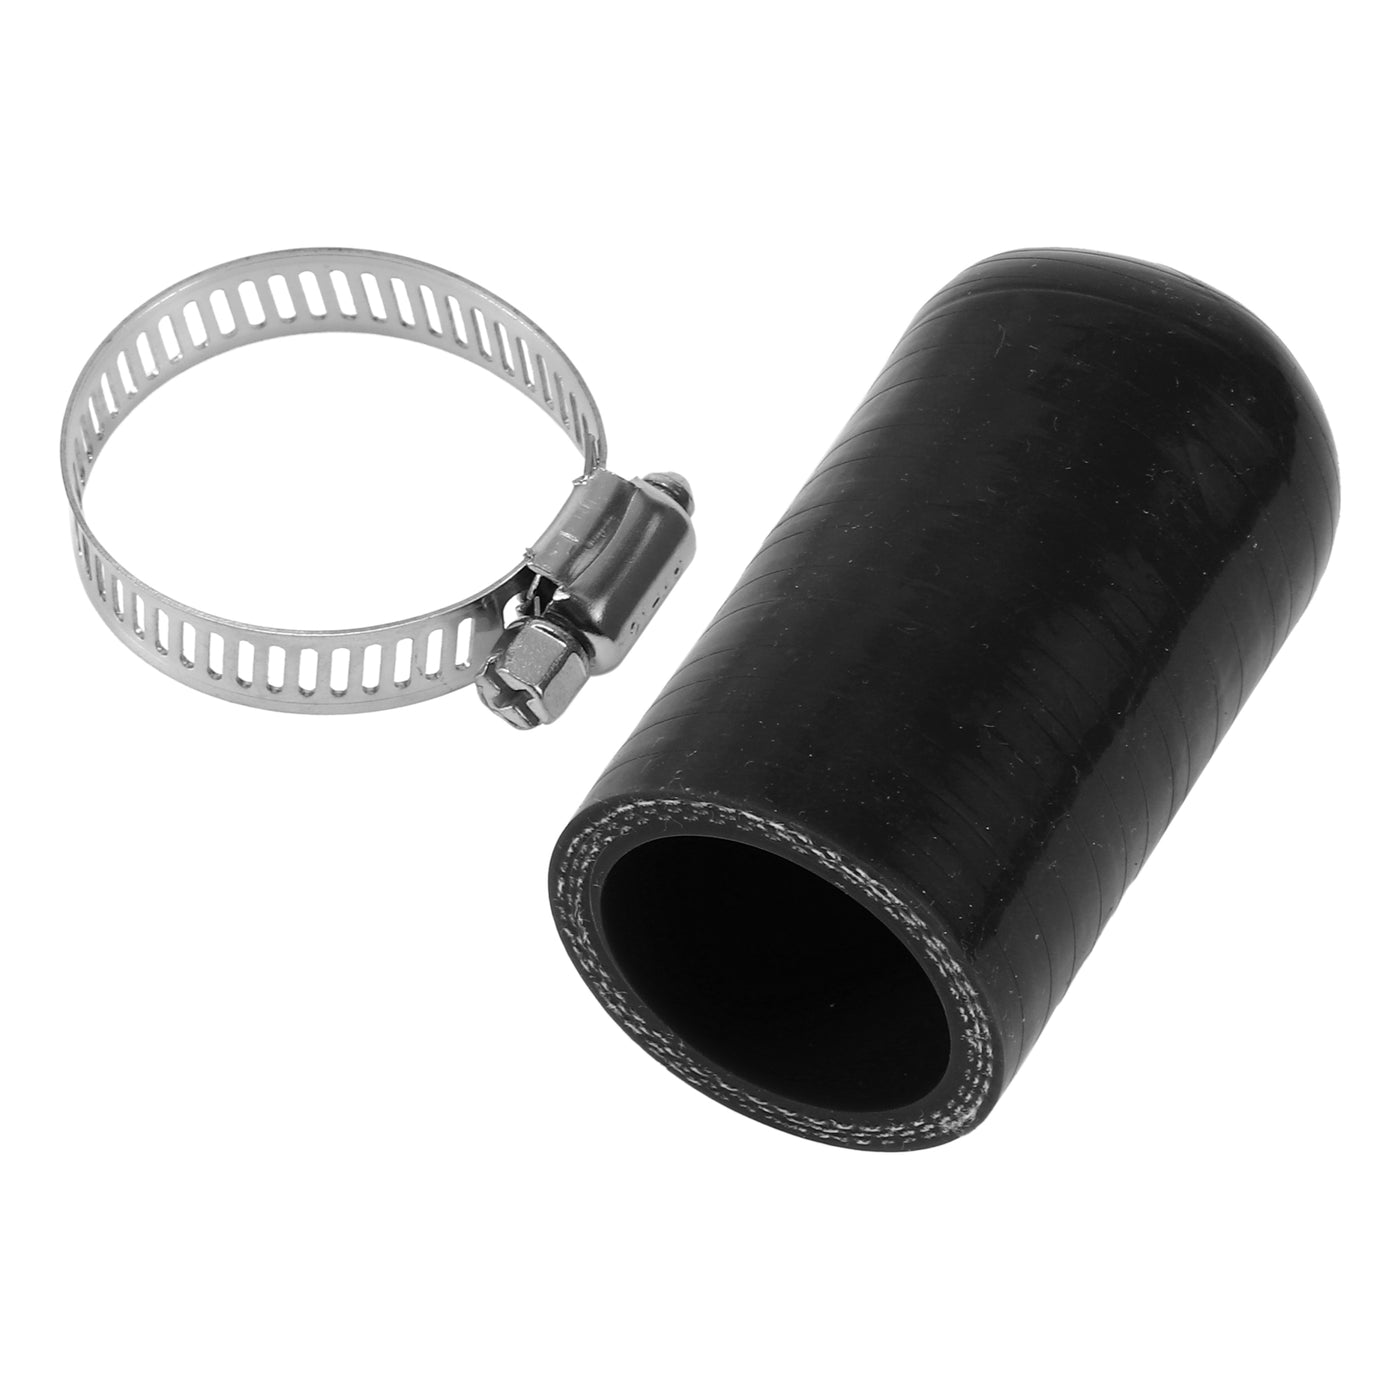 X AUTOHAUX 1 Pcs 60mm Length 30mm/1.18" ID Black Car Silicone Rubber Hose End Cap with Clamp Silicone Reinforced Blanking Cap for Bypass Tube Universal